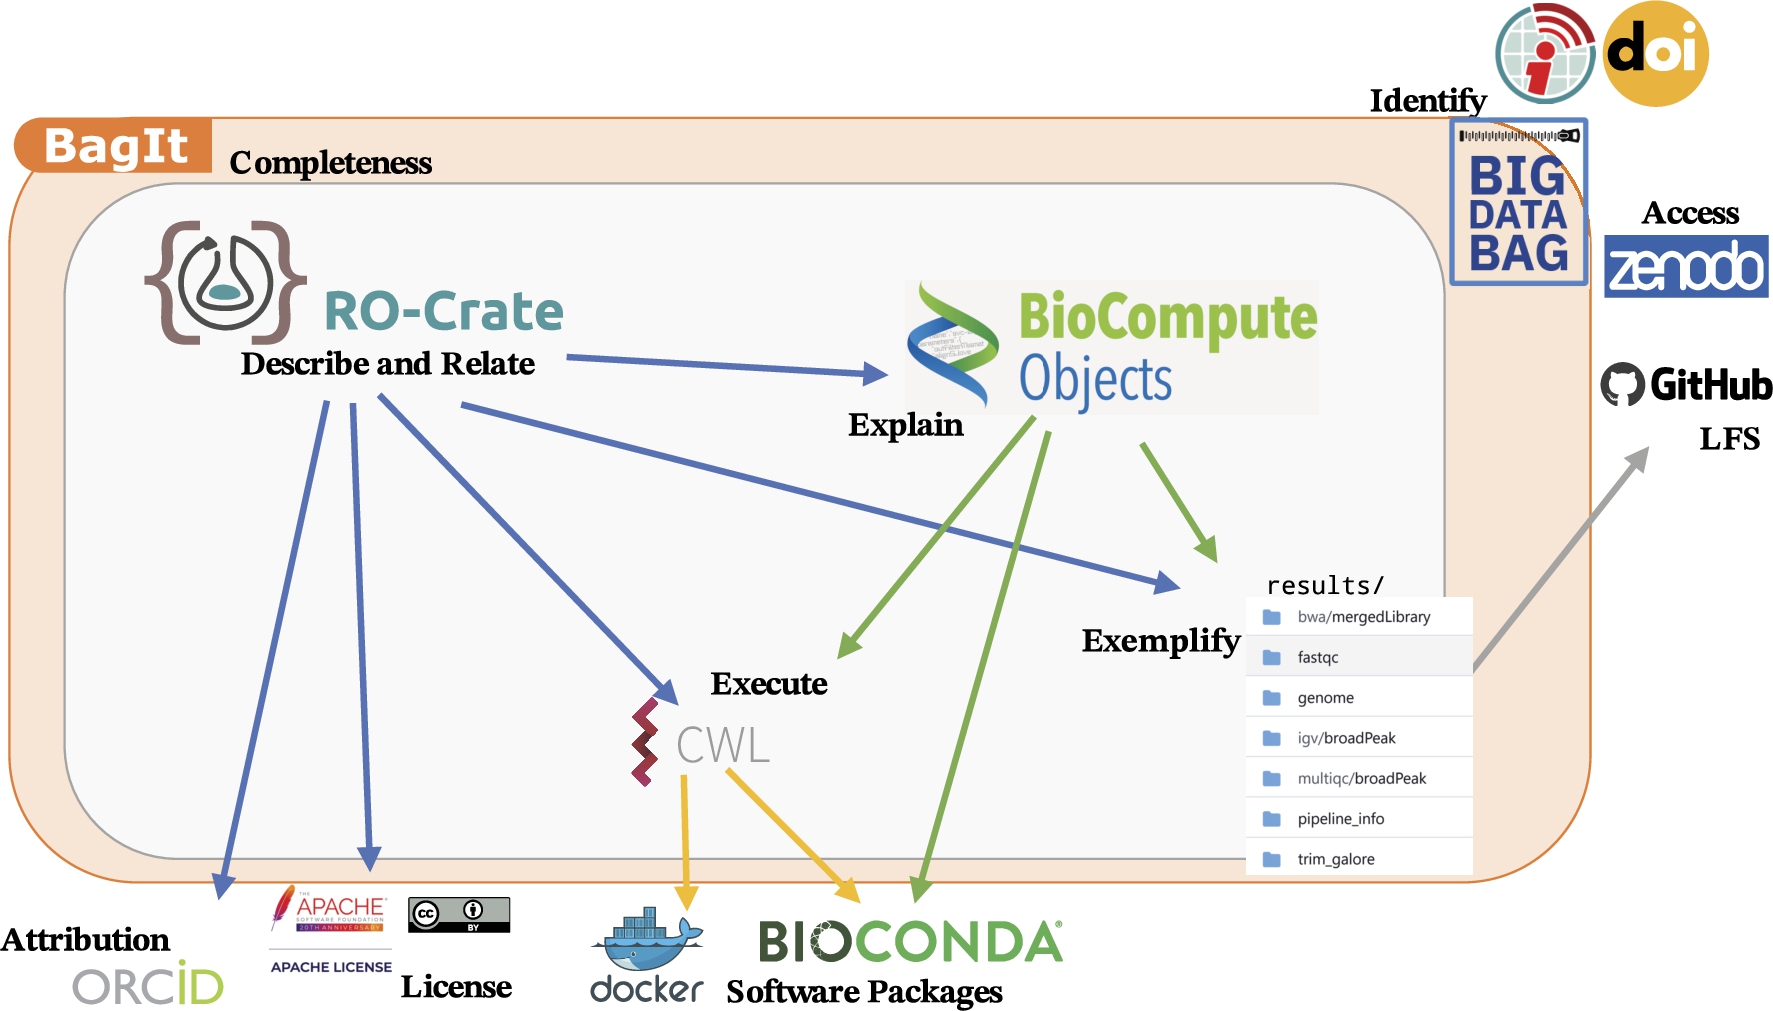 Separation of Concerns in BCO RO-Crate. BioCompute Object (IEEE2791) is a JSON file that structurally explains the purpose and implementation of a computational workflow, for instance implemented in Common Workflow Language (CWL), that installs the workflow’s software dependencies as Docker containers or BioConda packages. An example execution of the workflow shows the different kinds of result outputs, which may be external, using GitHub LFS [85] to support larger data. RO-Crate gathers all these local and external resources, relating them and giving individual descriptions, for instance permanent DOI identifiers for reused datasets accessed from Zenodo, but also adding external identifiers to attribute authors using ORCID or to identify which licences apply to individual resources. The RO-Crate and its local files are captured in a BagIt whose checksum ensures completeness, combined with Big Data Bag [25] features to “complete” the bag with large external files such as the workflow outputs.